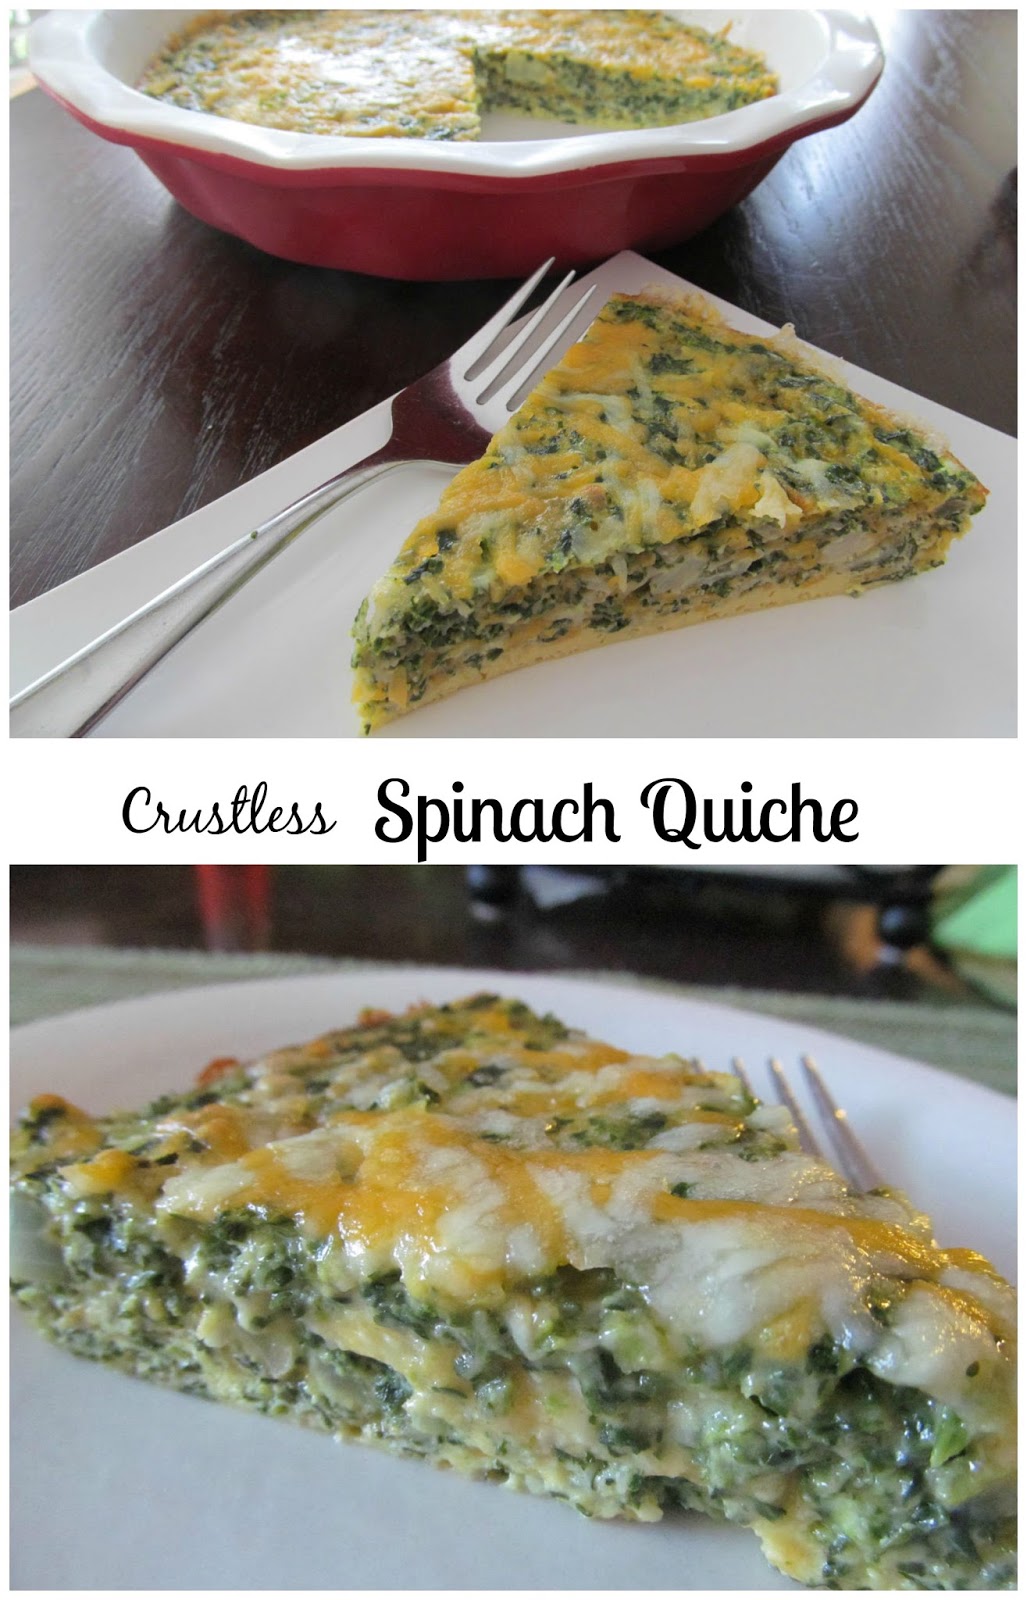 Easy Peasy Healthy Recipes: Crustless Spinach Quiche